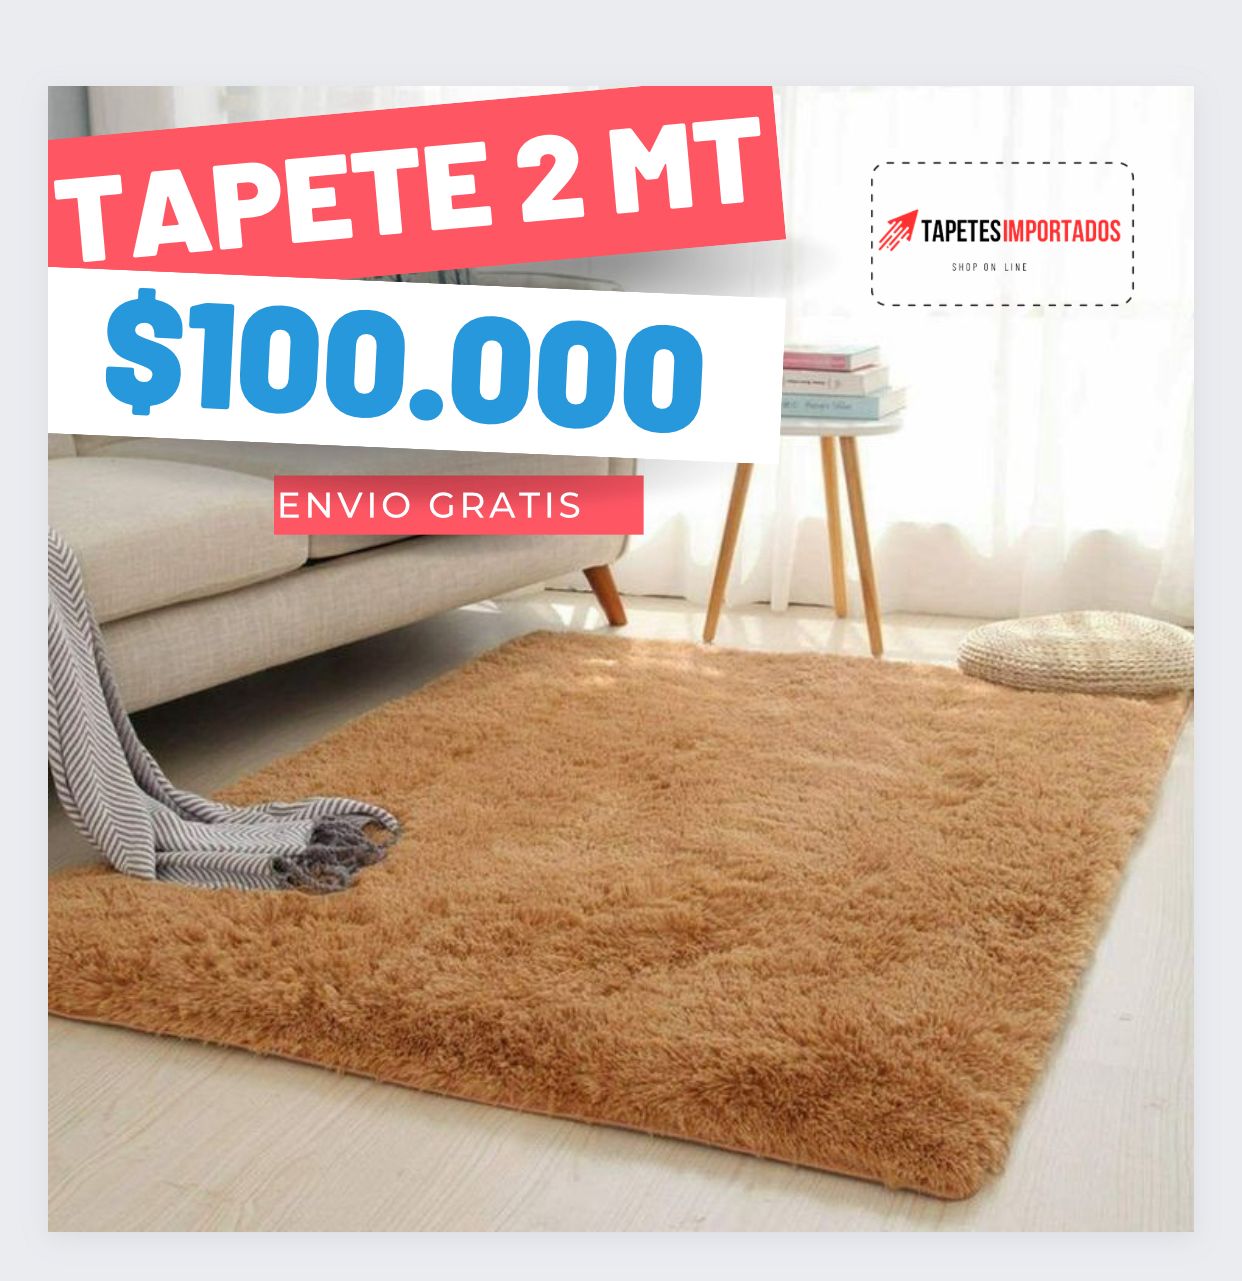 TAPETE PARA SALA COLOR MOSTAZA – Tapetes Importados Colombia